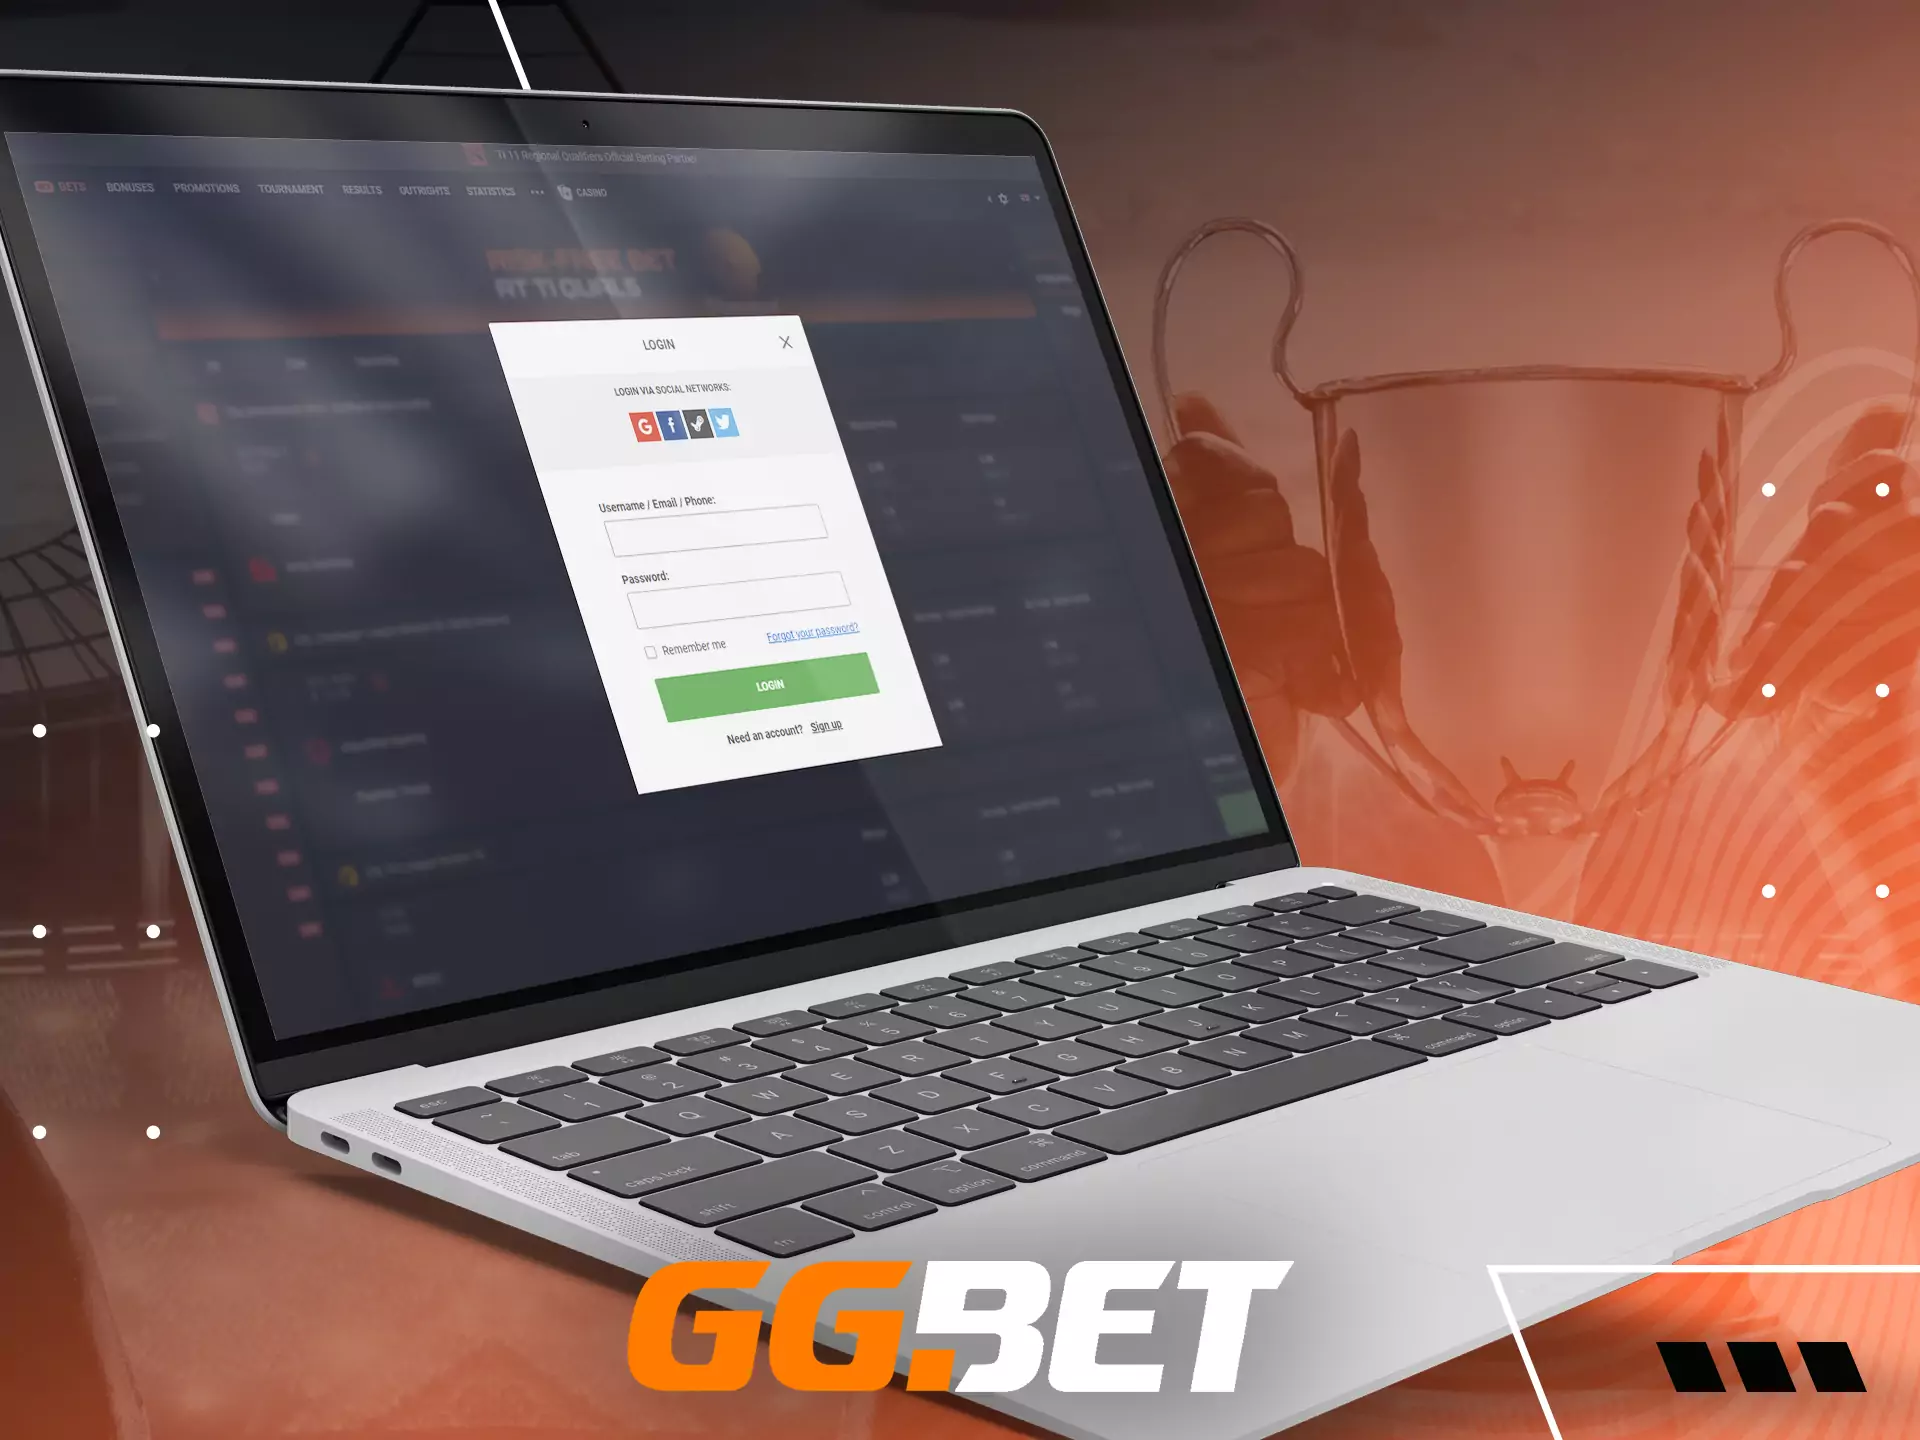 To start betting on GGBet, log in with your username and password.